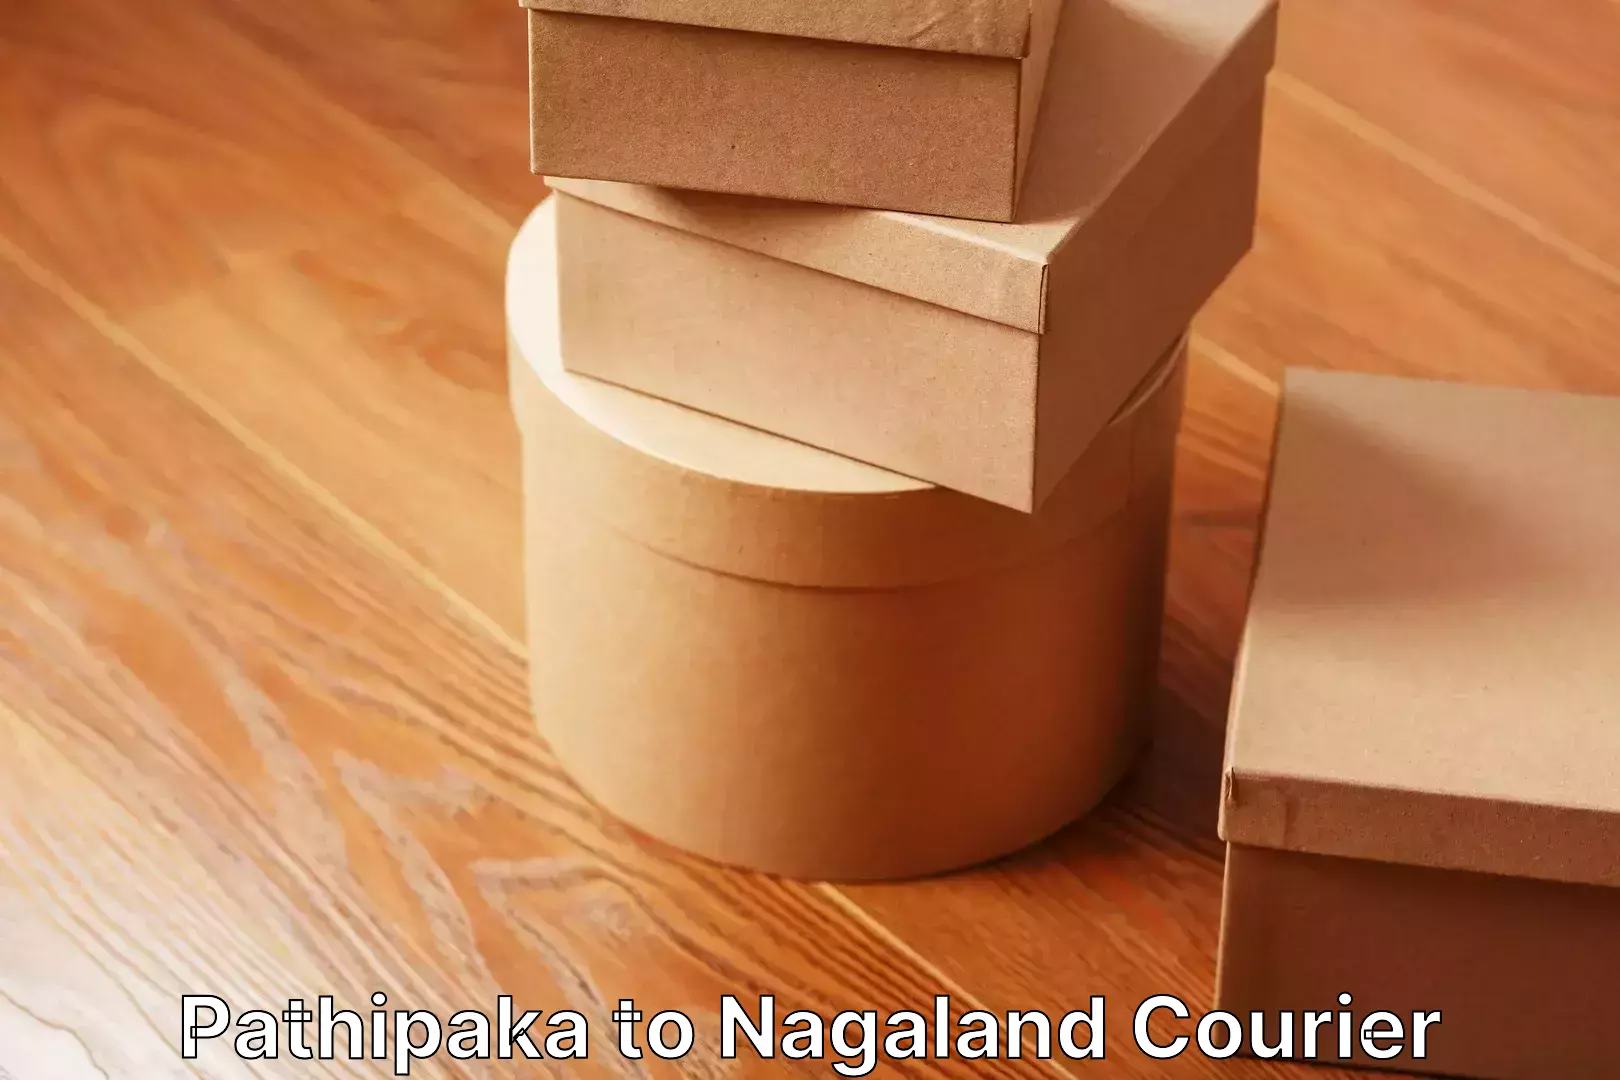 Reliable moving assistance Pathipaka to Nagaland